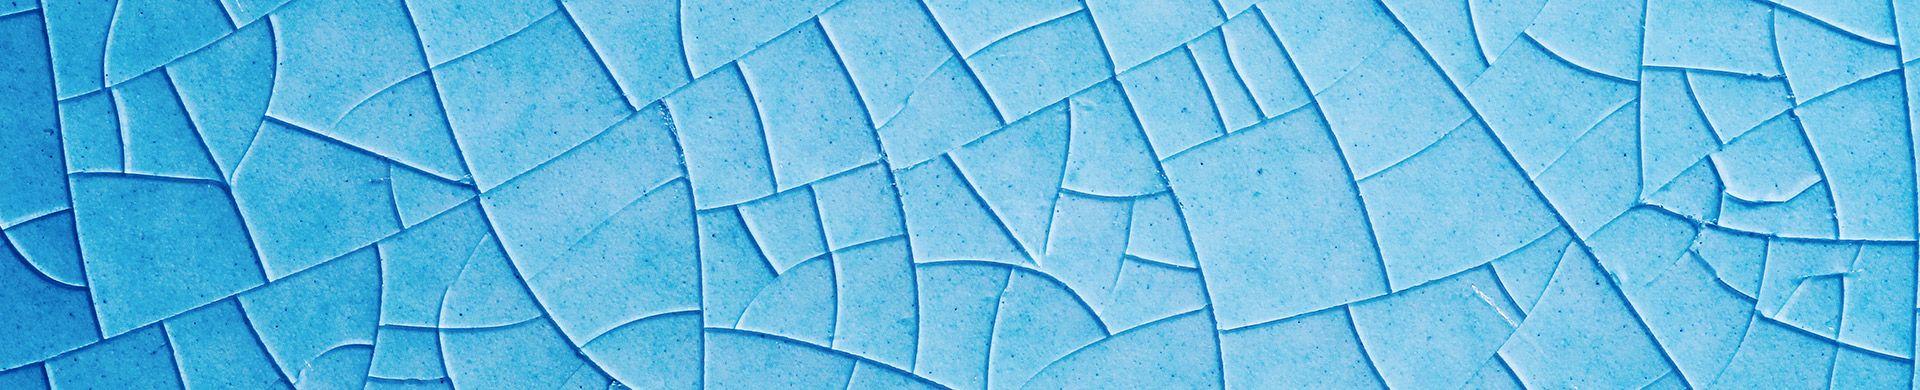 how to seal a porous tile